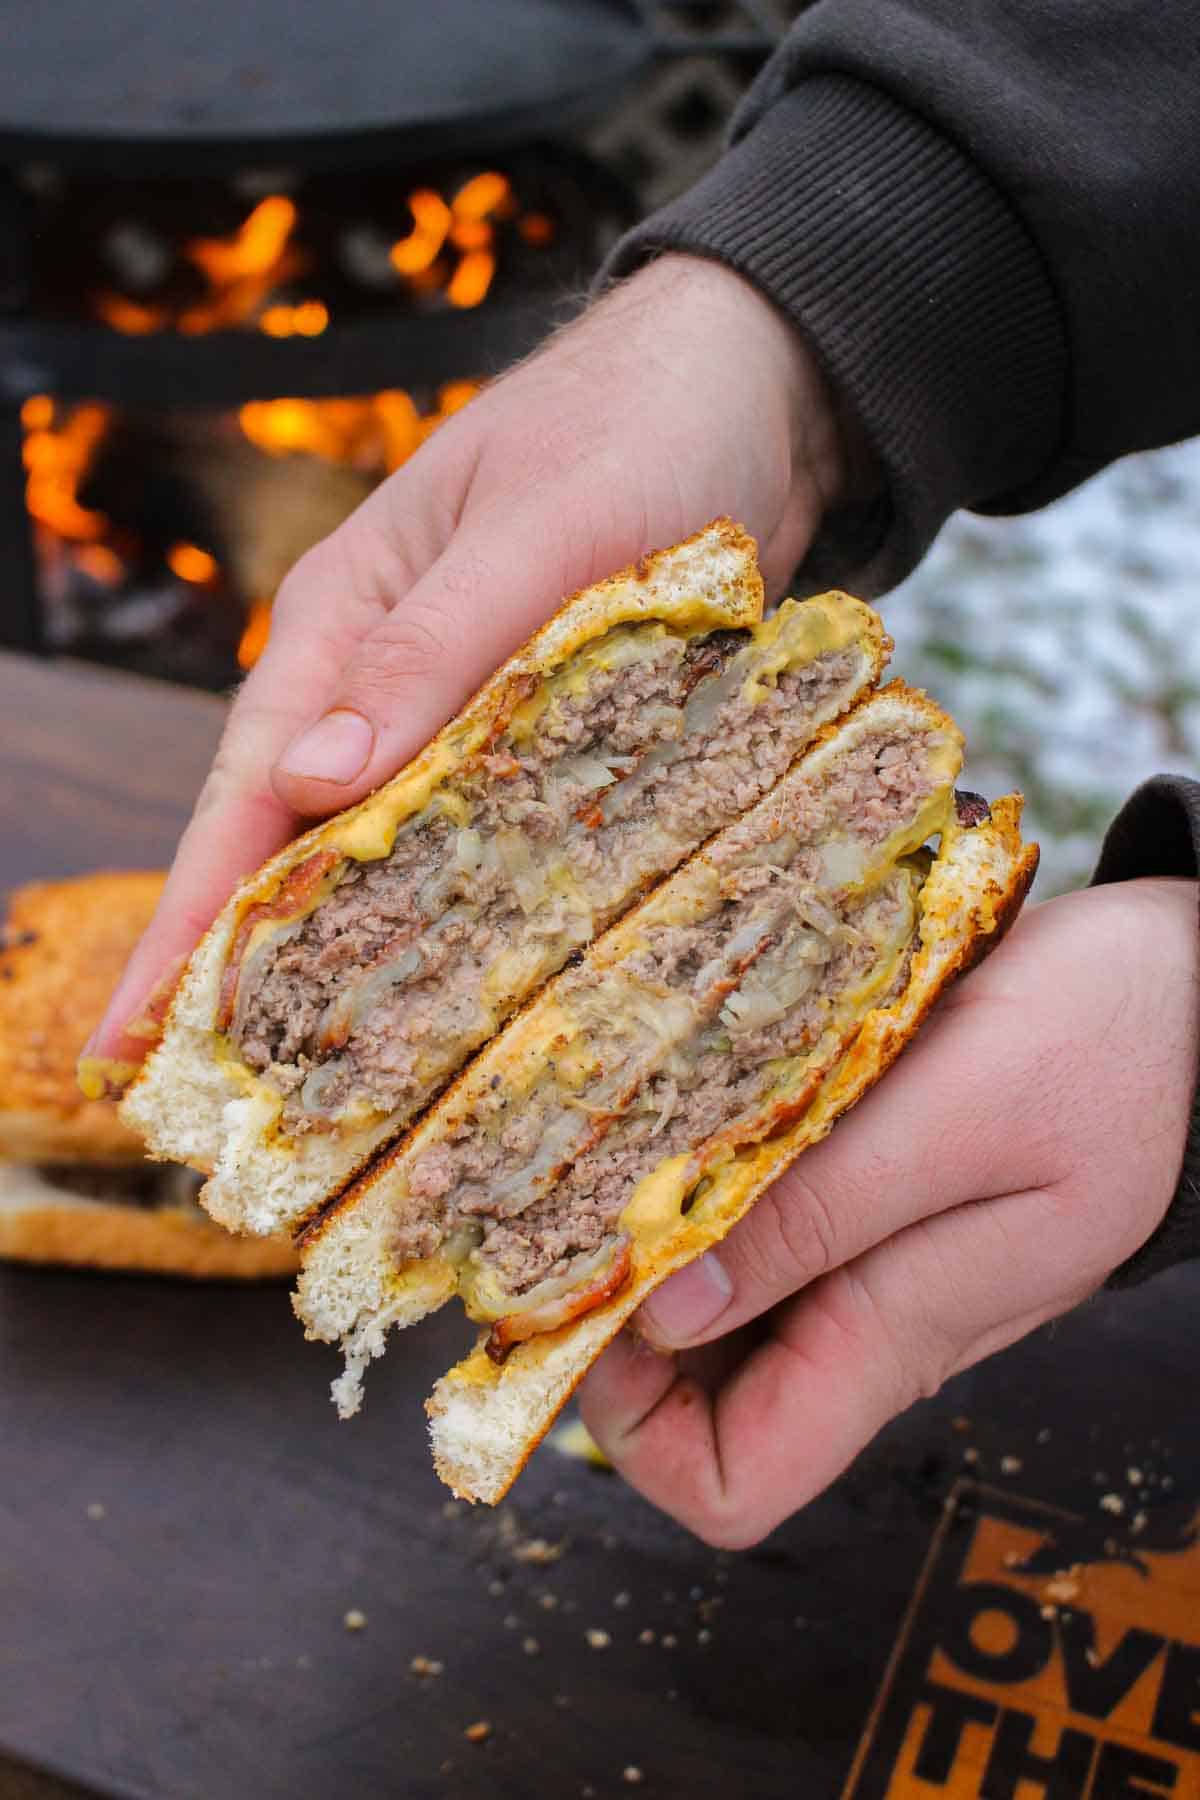 Holding one of the sliced Oklahoma Onion Patty Melts close up to the camera.